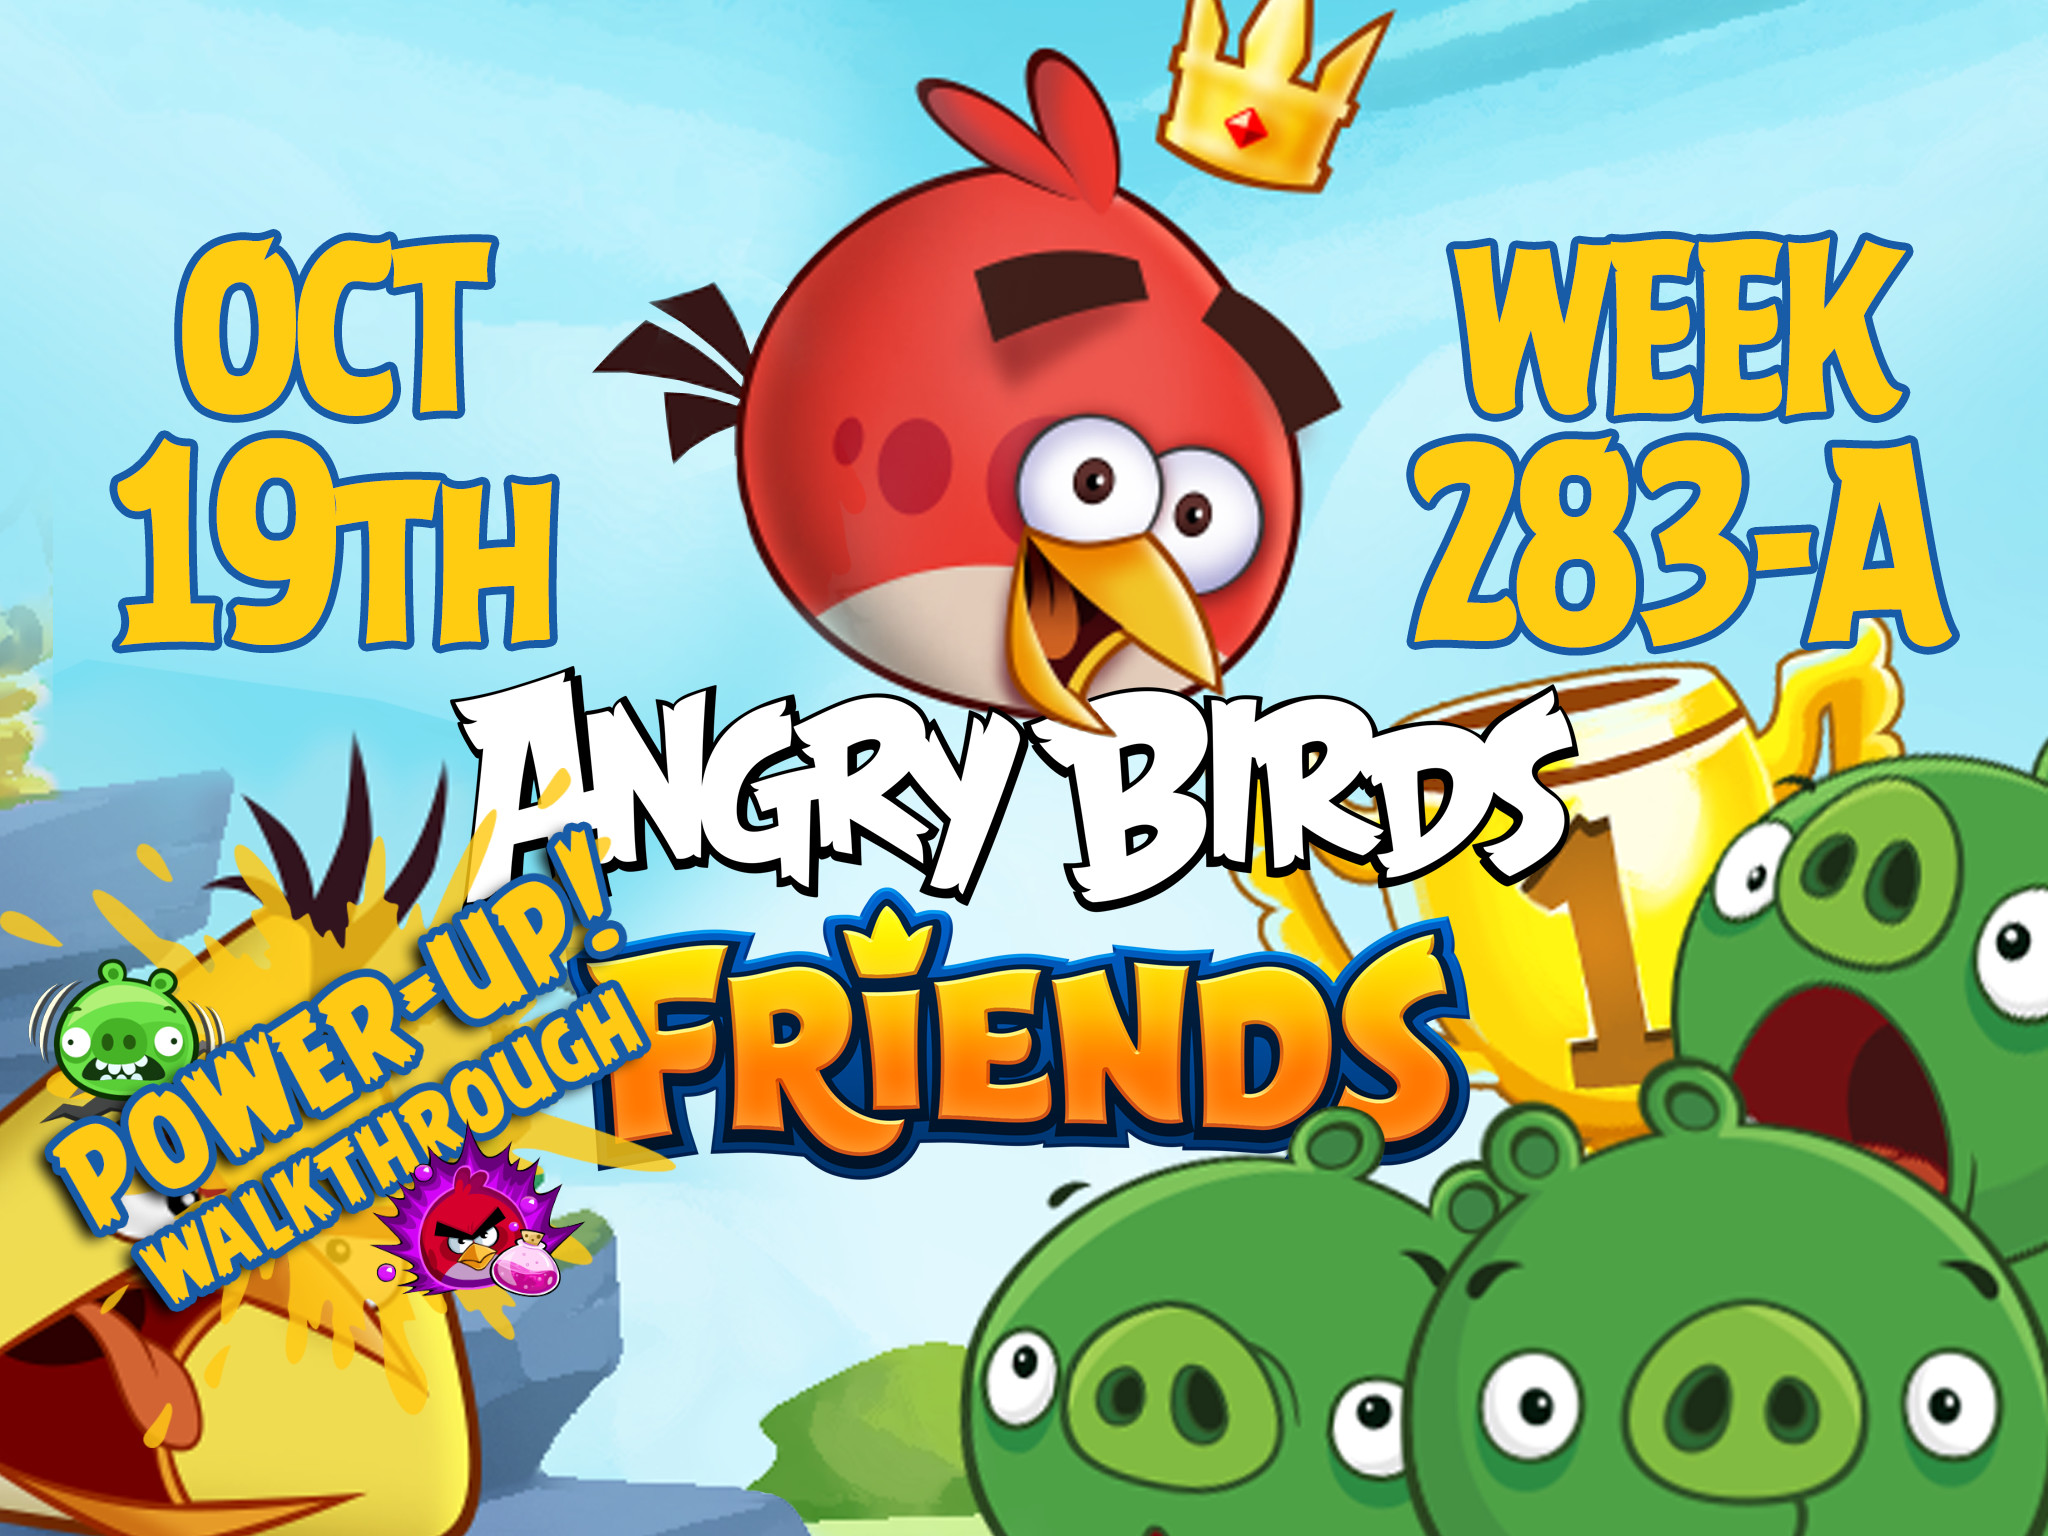 Angry Birds Friends Tournament Week 283-A Feature Image PU